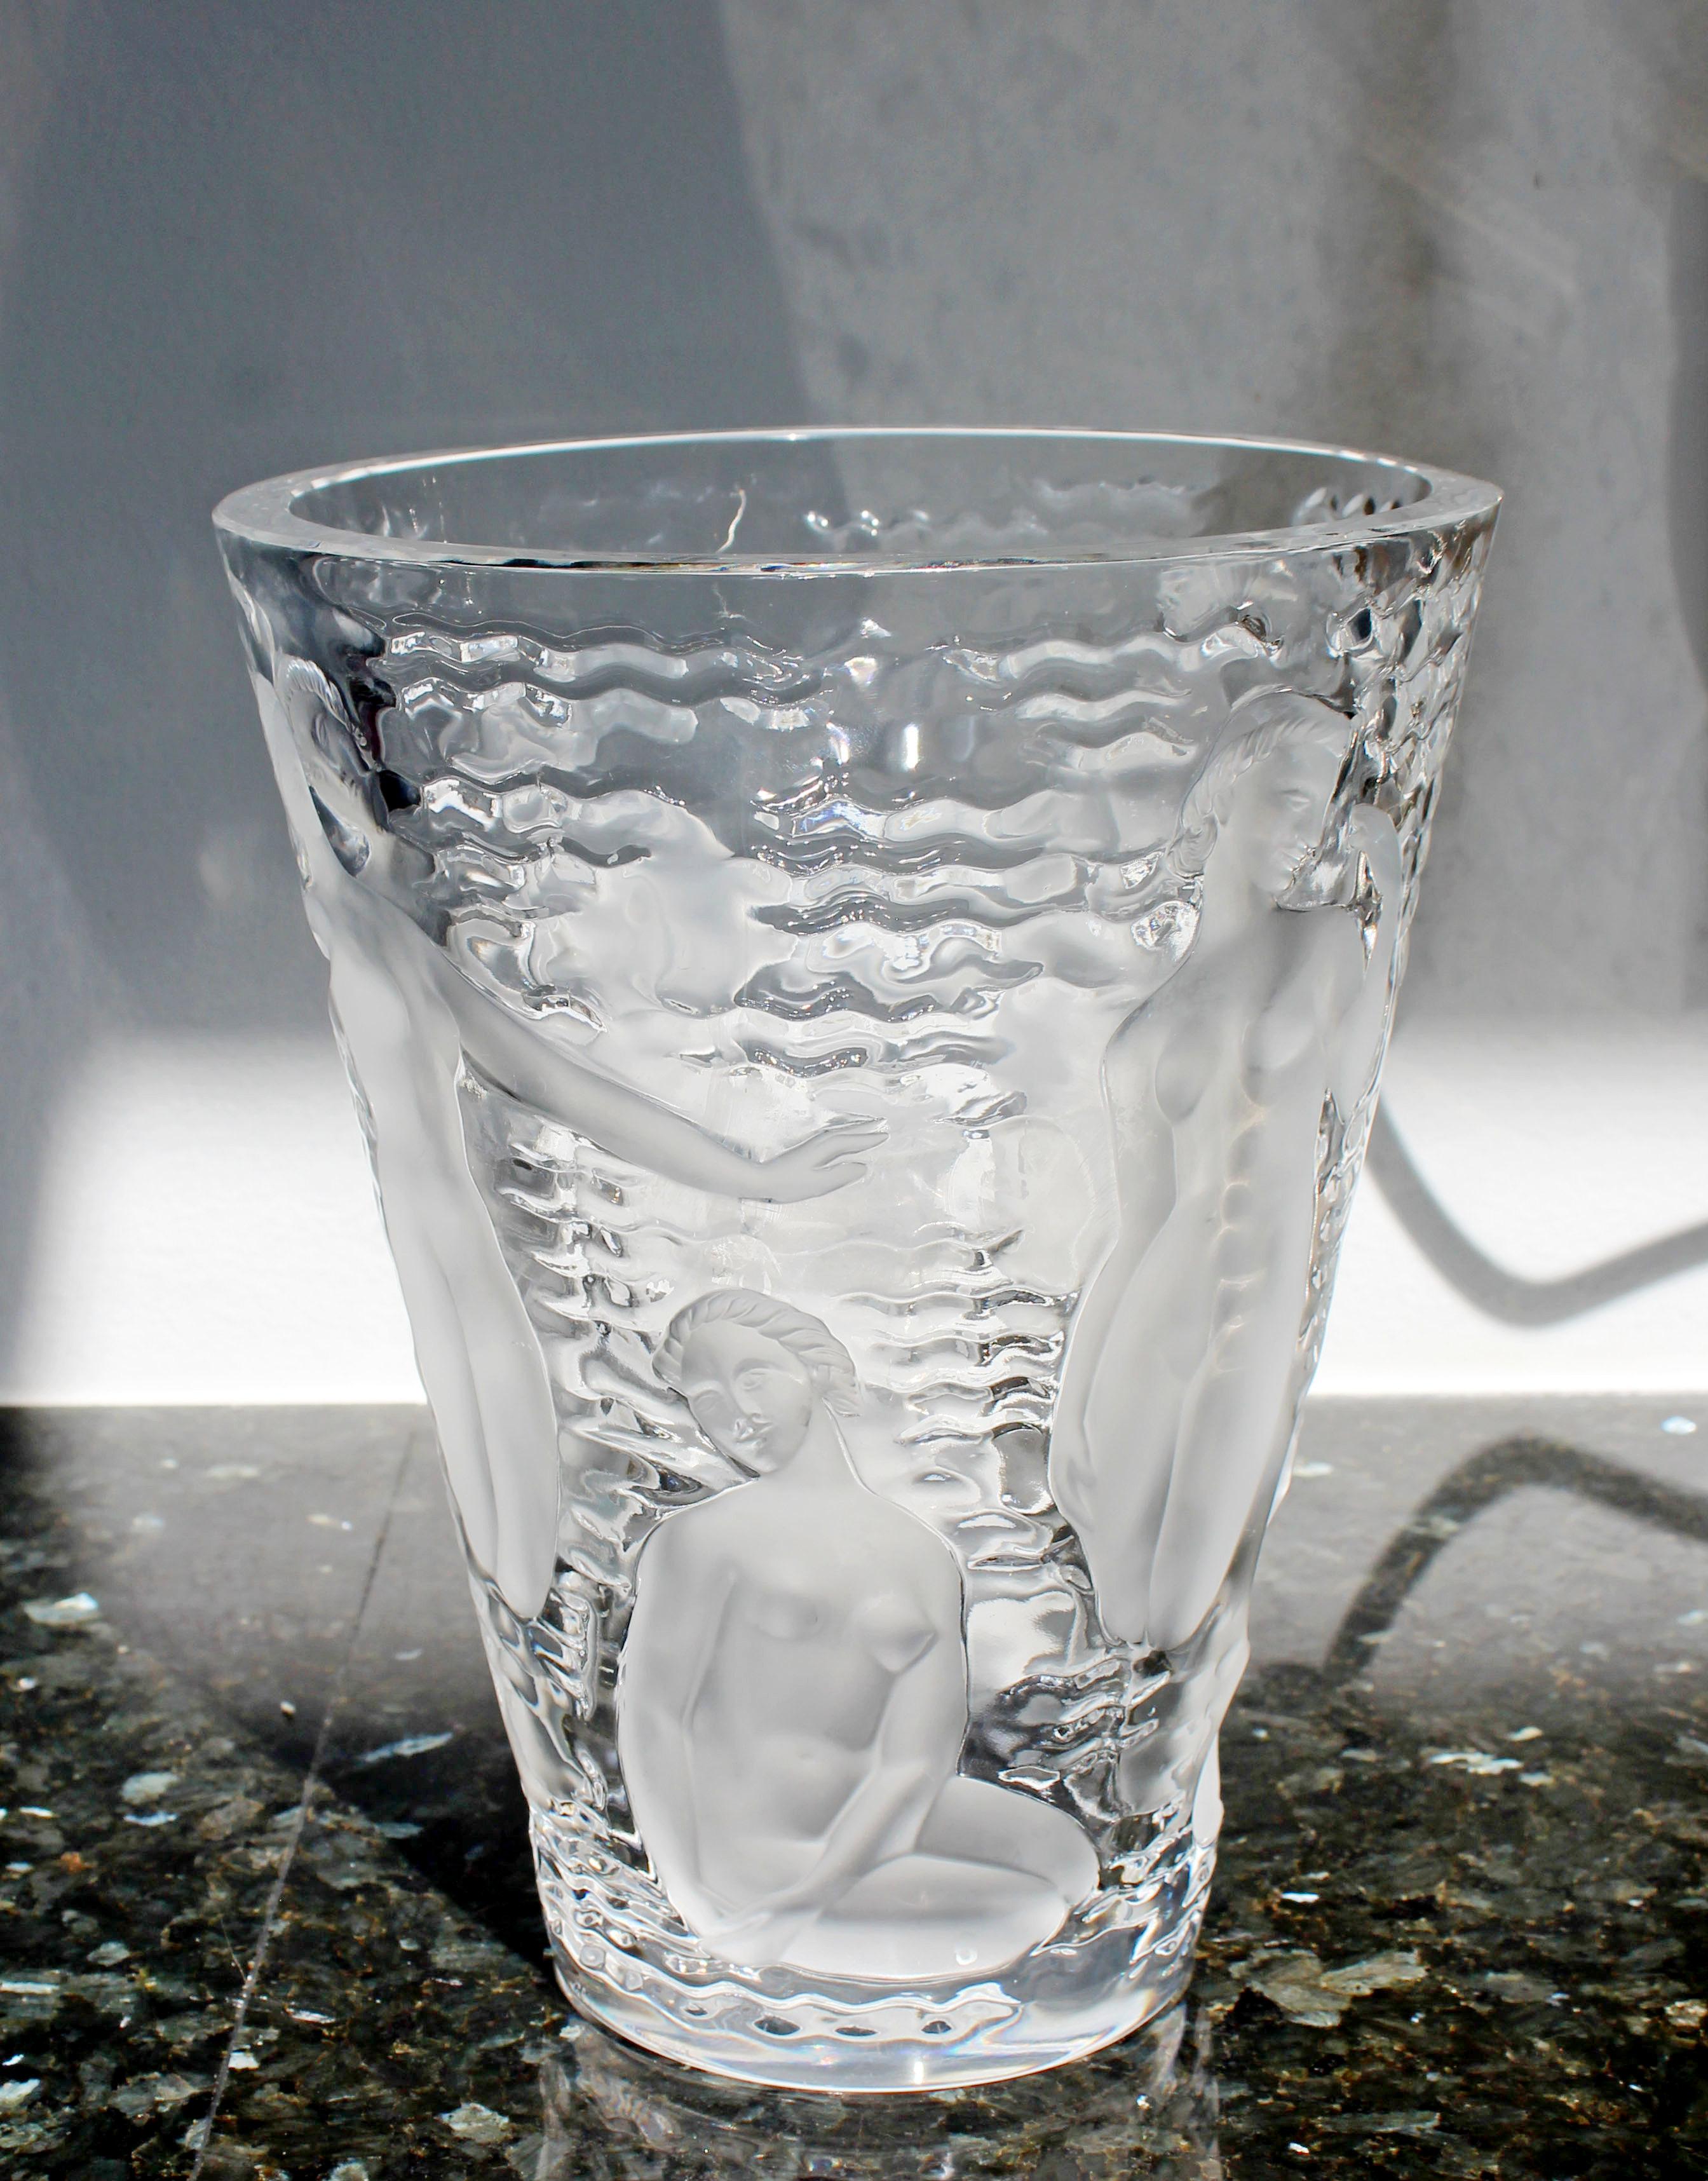 For your consideration is a stunning, crystal vase with muses engraved in the glass, by Lalique France. In excellent condition. The dimensions are 7.5